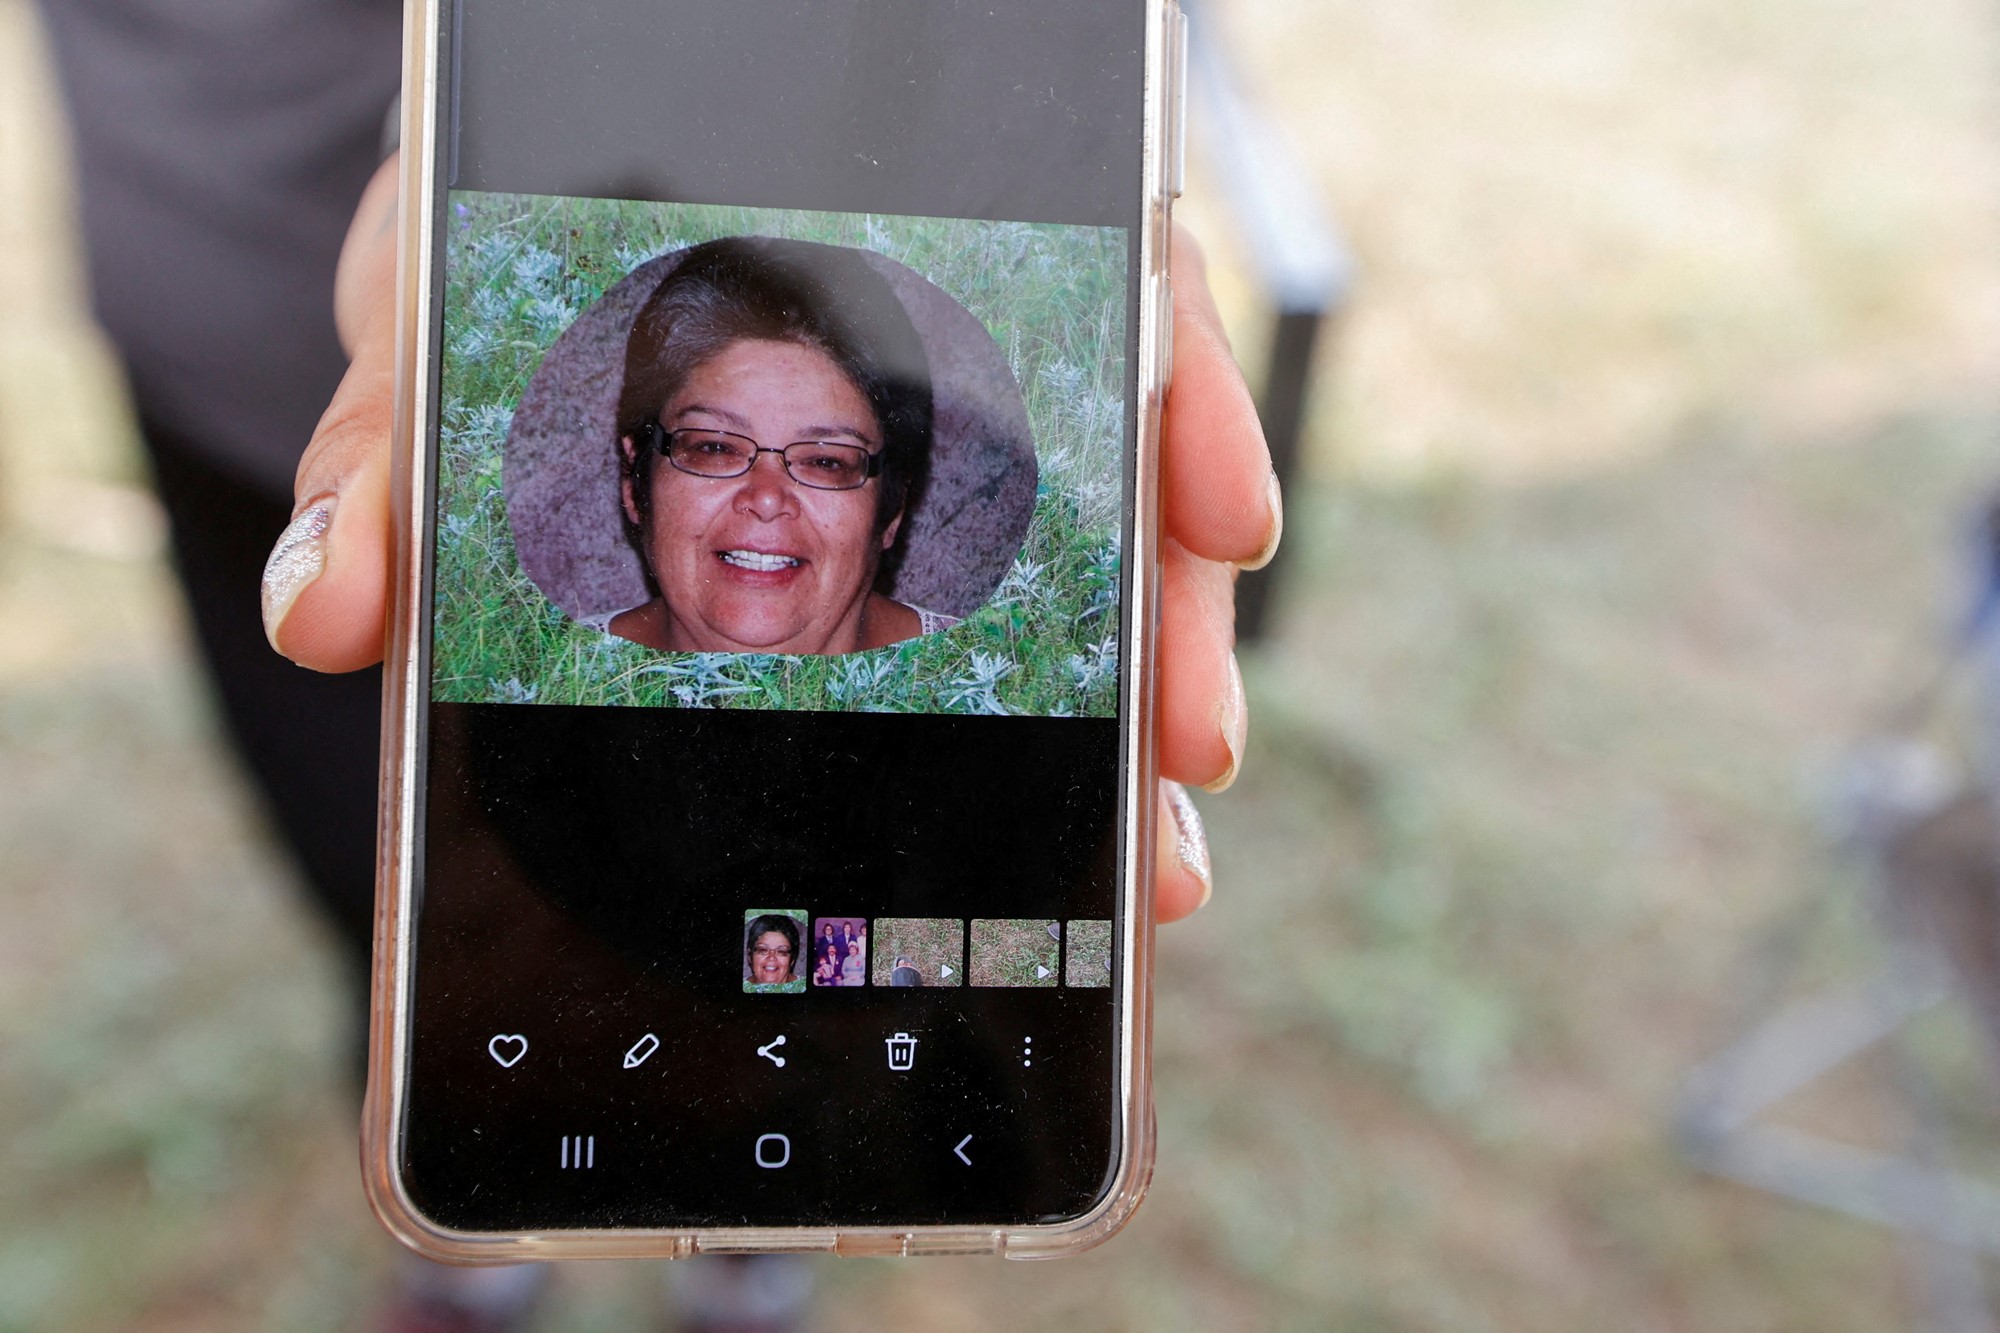 a person holds a mobile phone showing a picture of a woman smiling